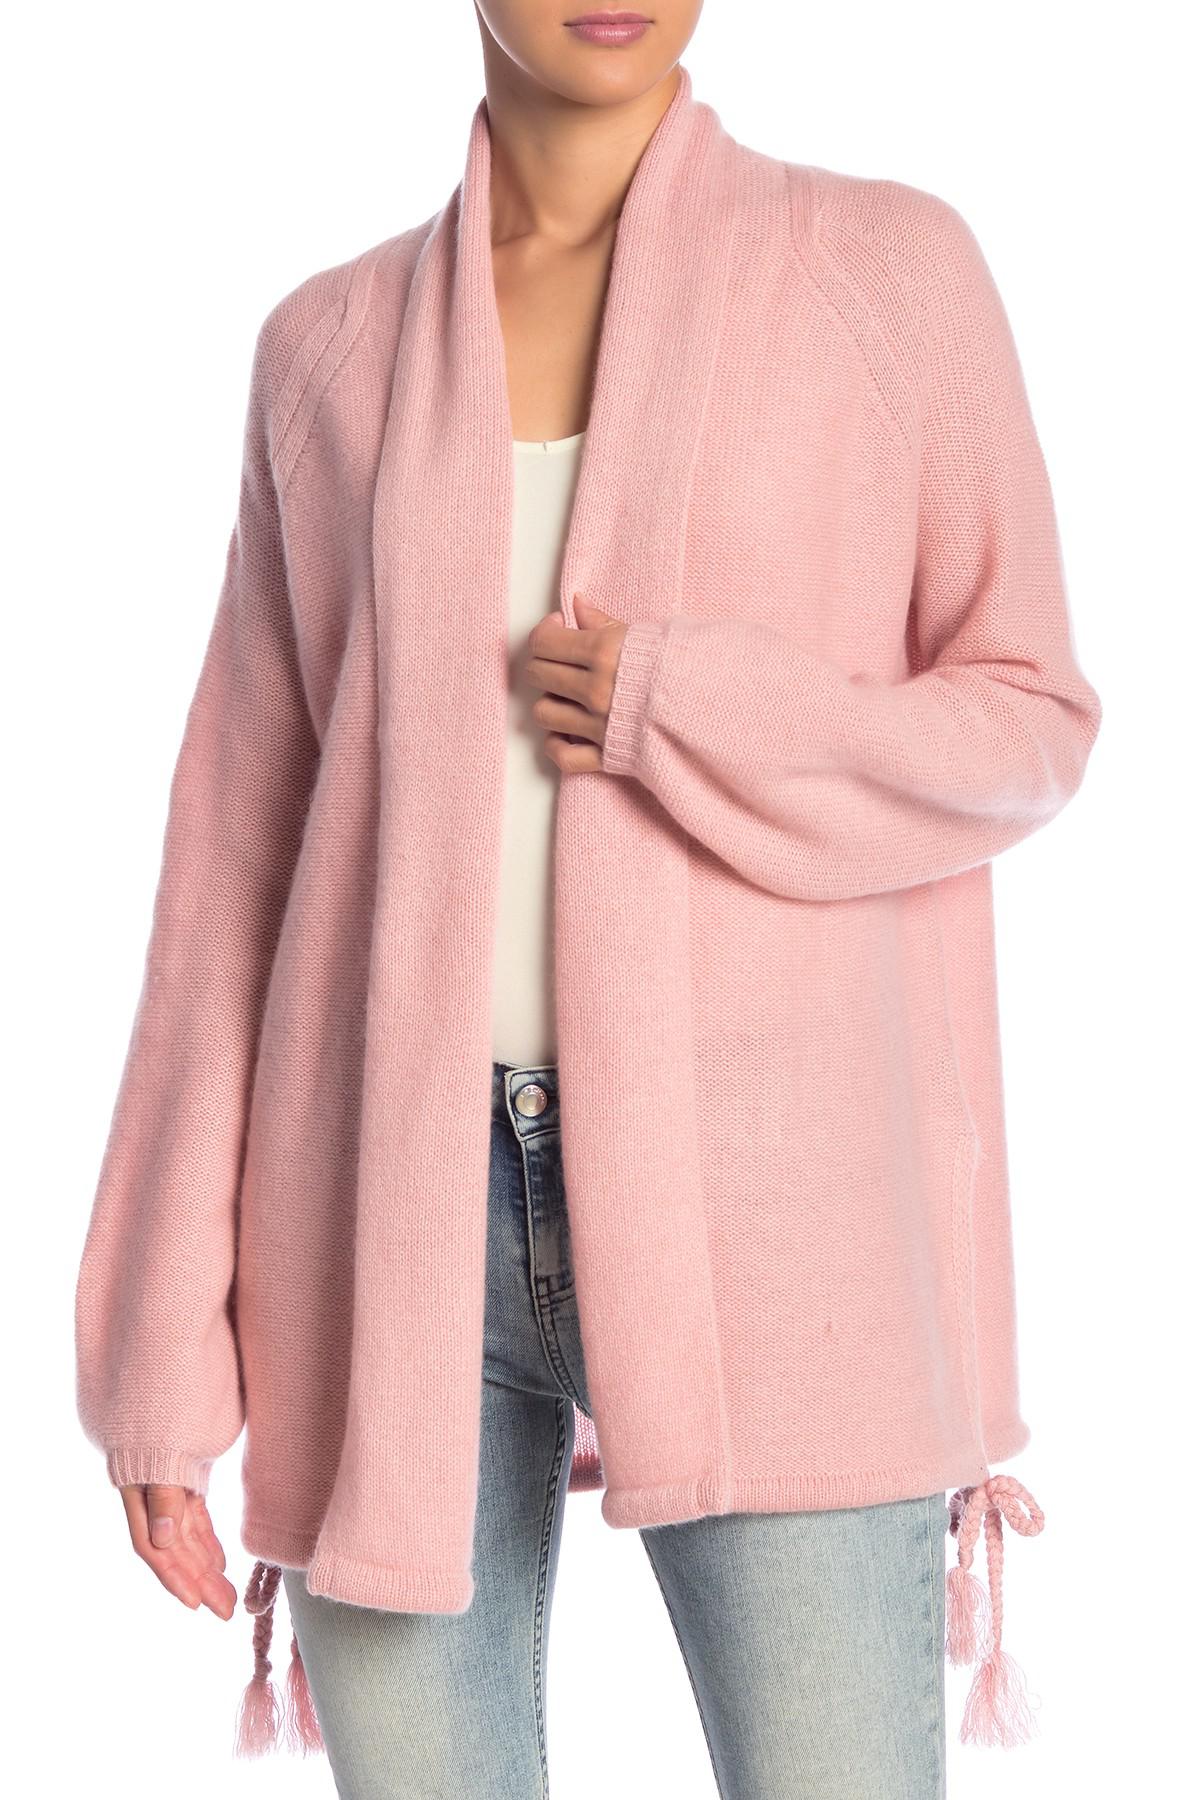 360cashmere Ida Open Front Cashmere Cardigan in Pink - Lyst